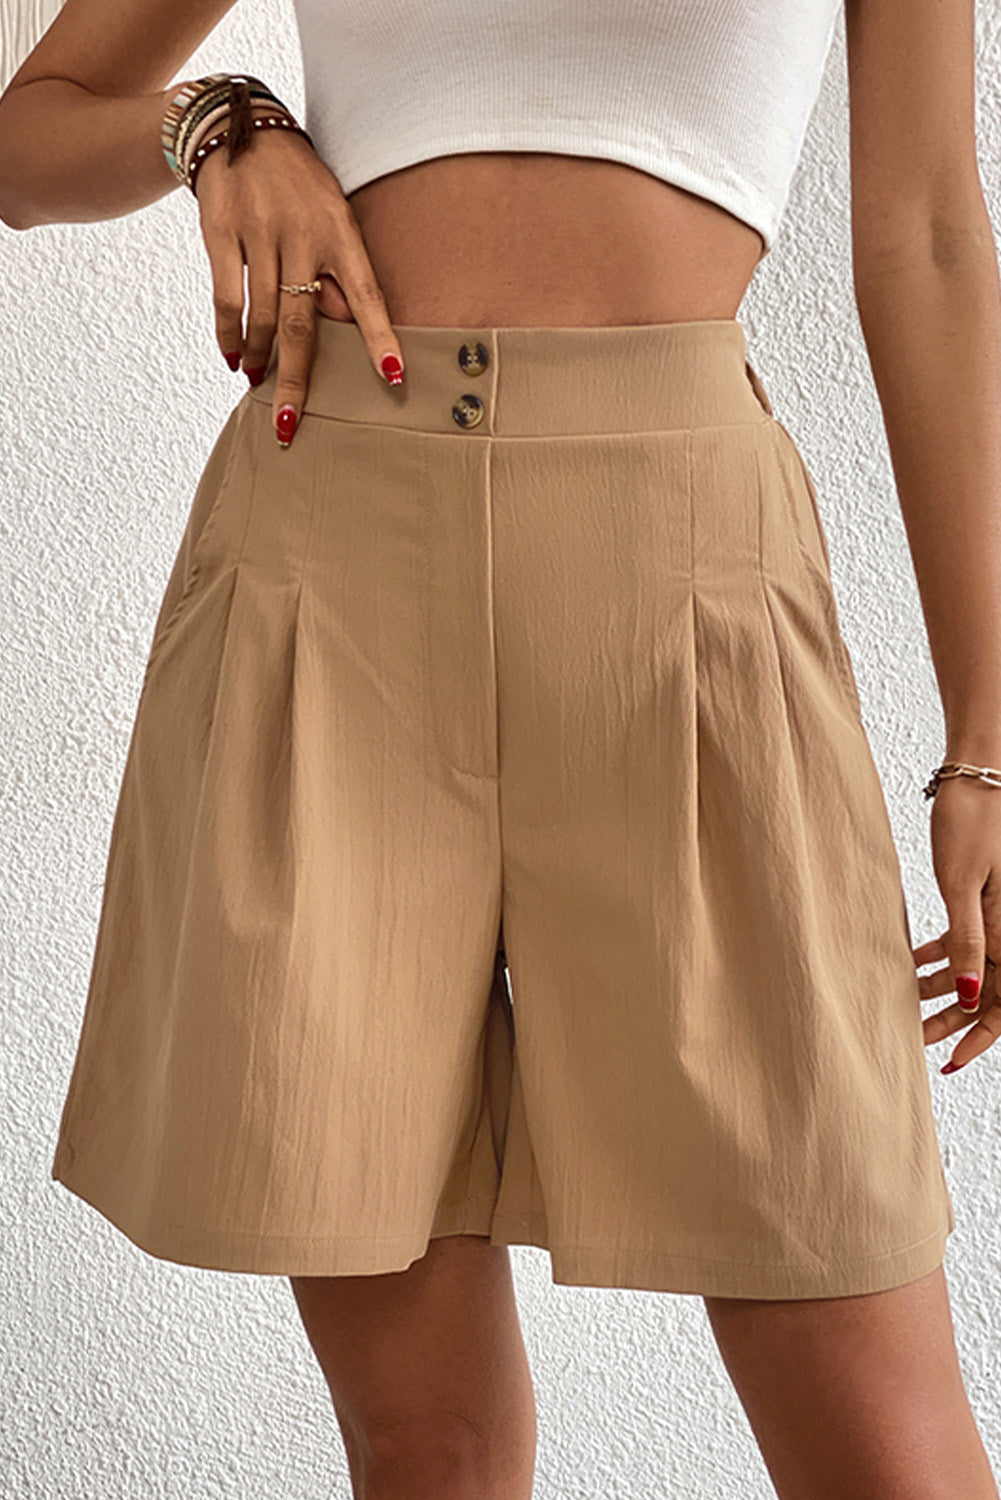 Light French Beige Solid Color High Waisted Shorts